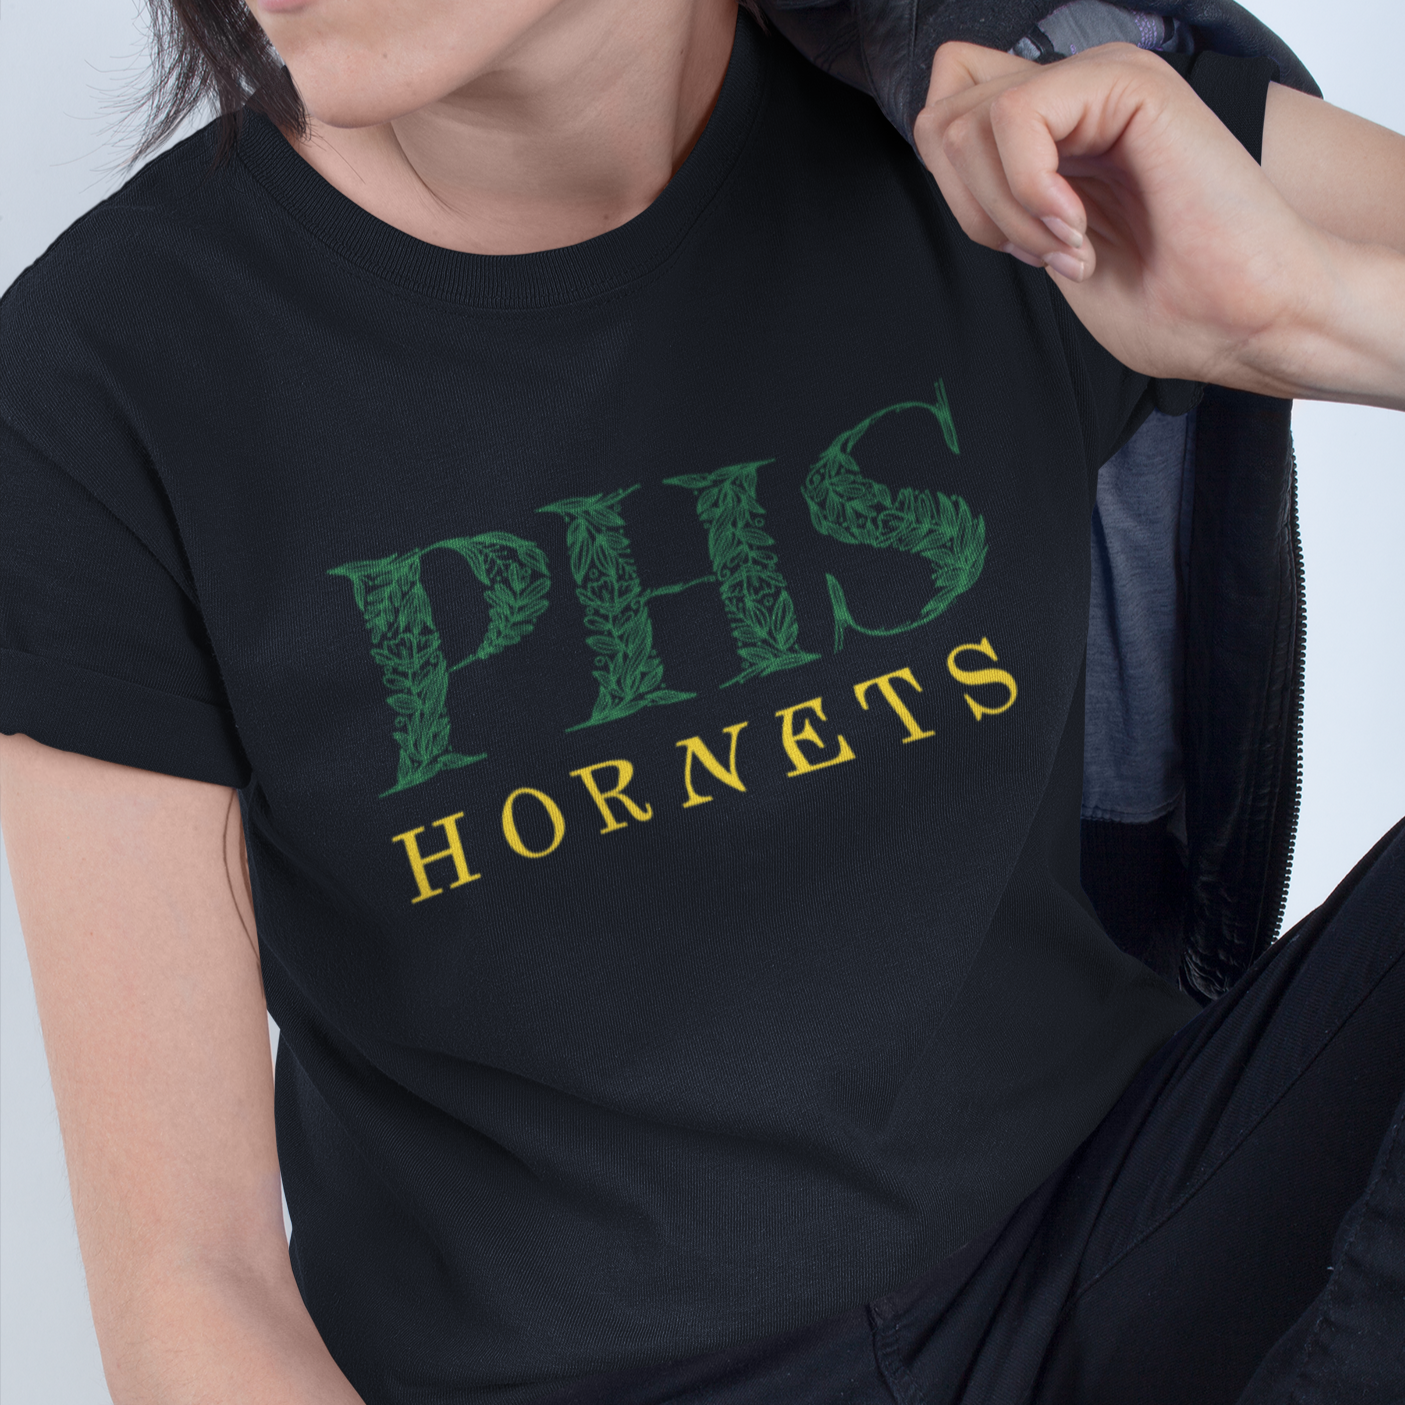 Preble Hornets Floral Tee - Unisex Sizing